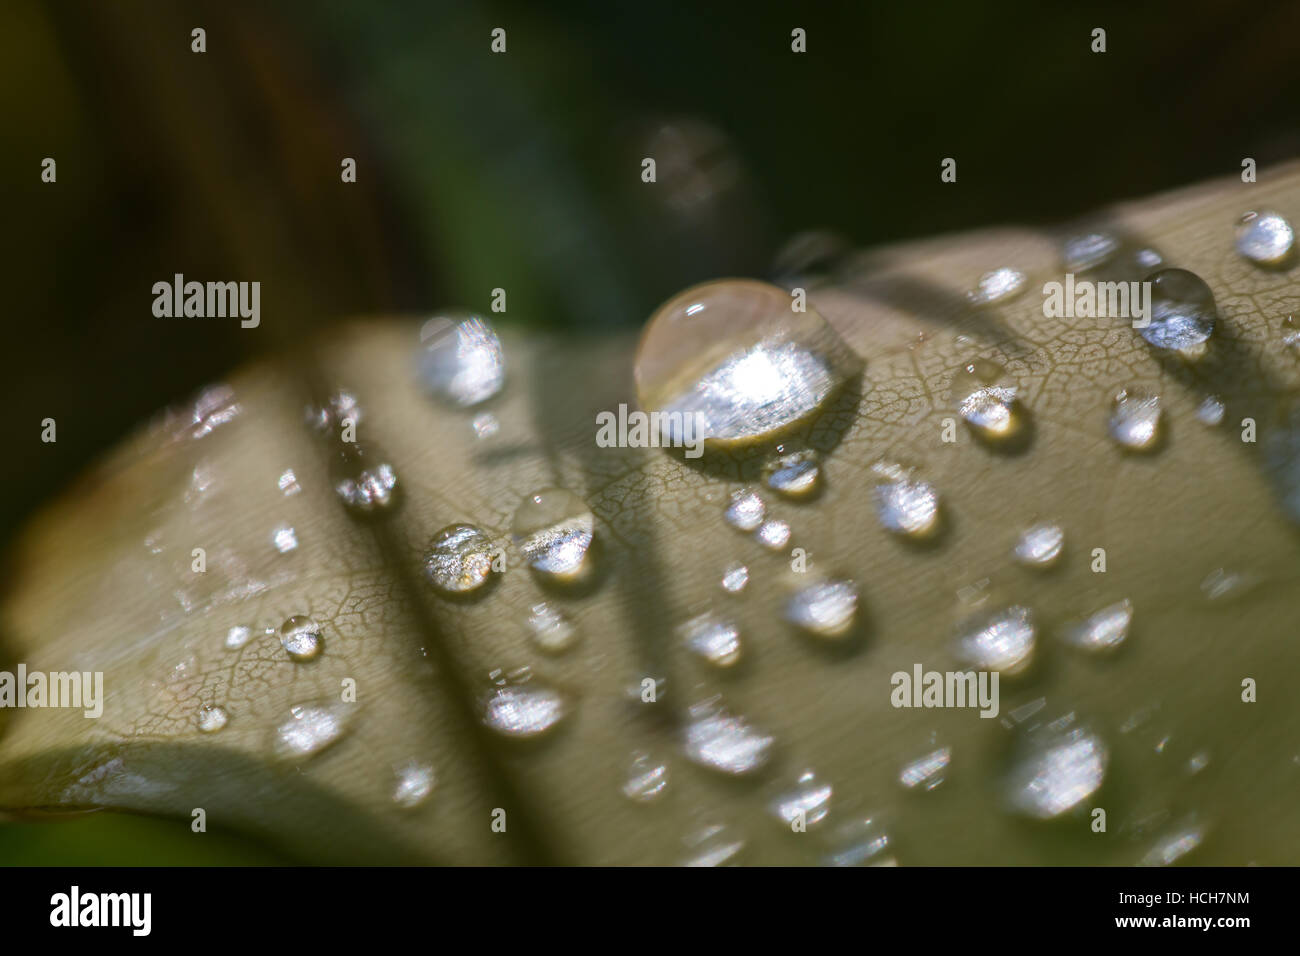 Water drops on a leaf showing refracted light and vein patterns Stock Photo